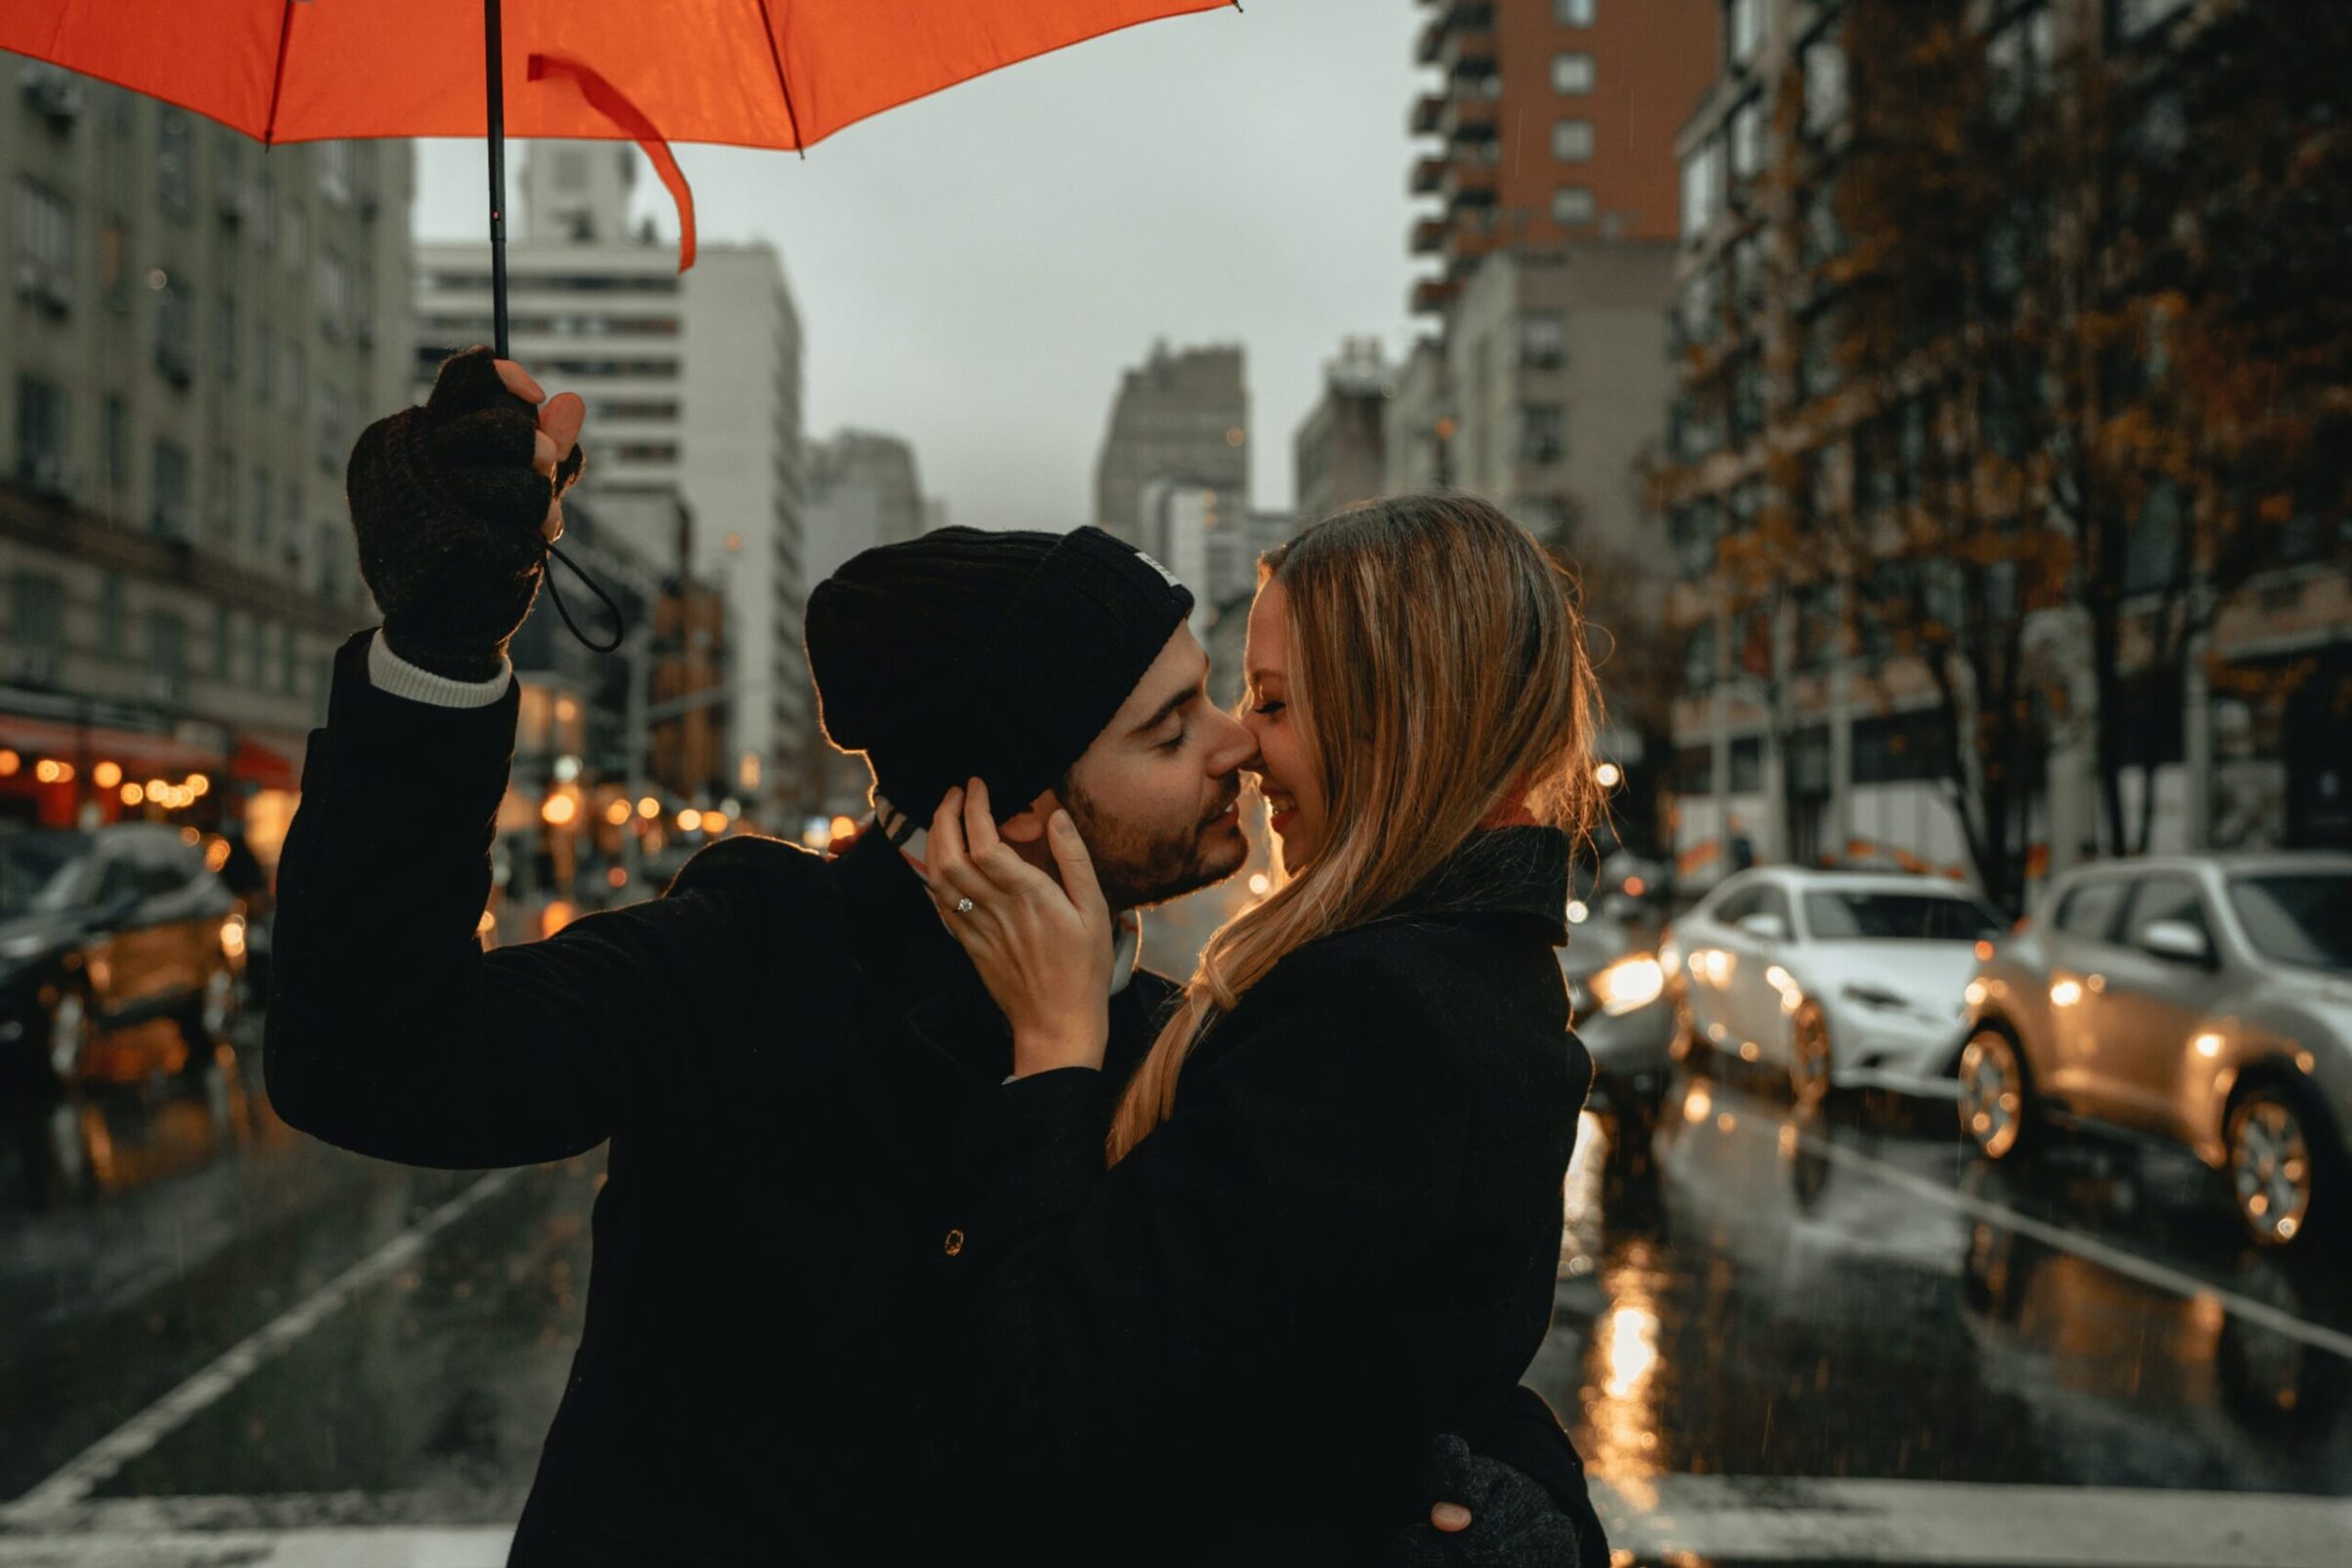 man and woman standing in the middle of a street boost intimacy by kissing. The man is holding an umbrella and there are cars and buildings behind the couple.